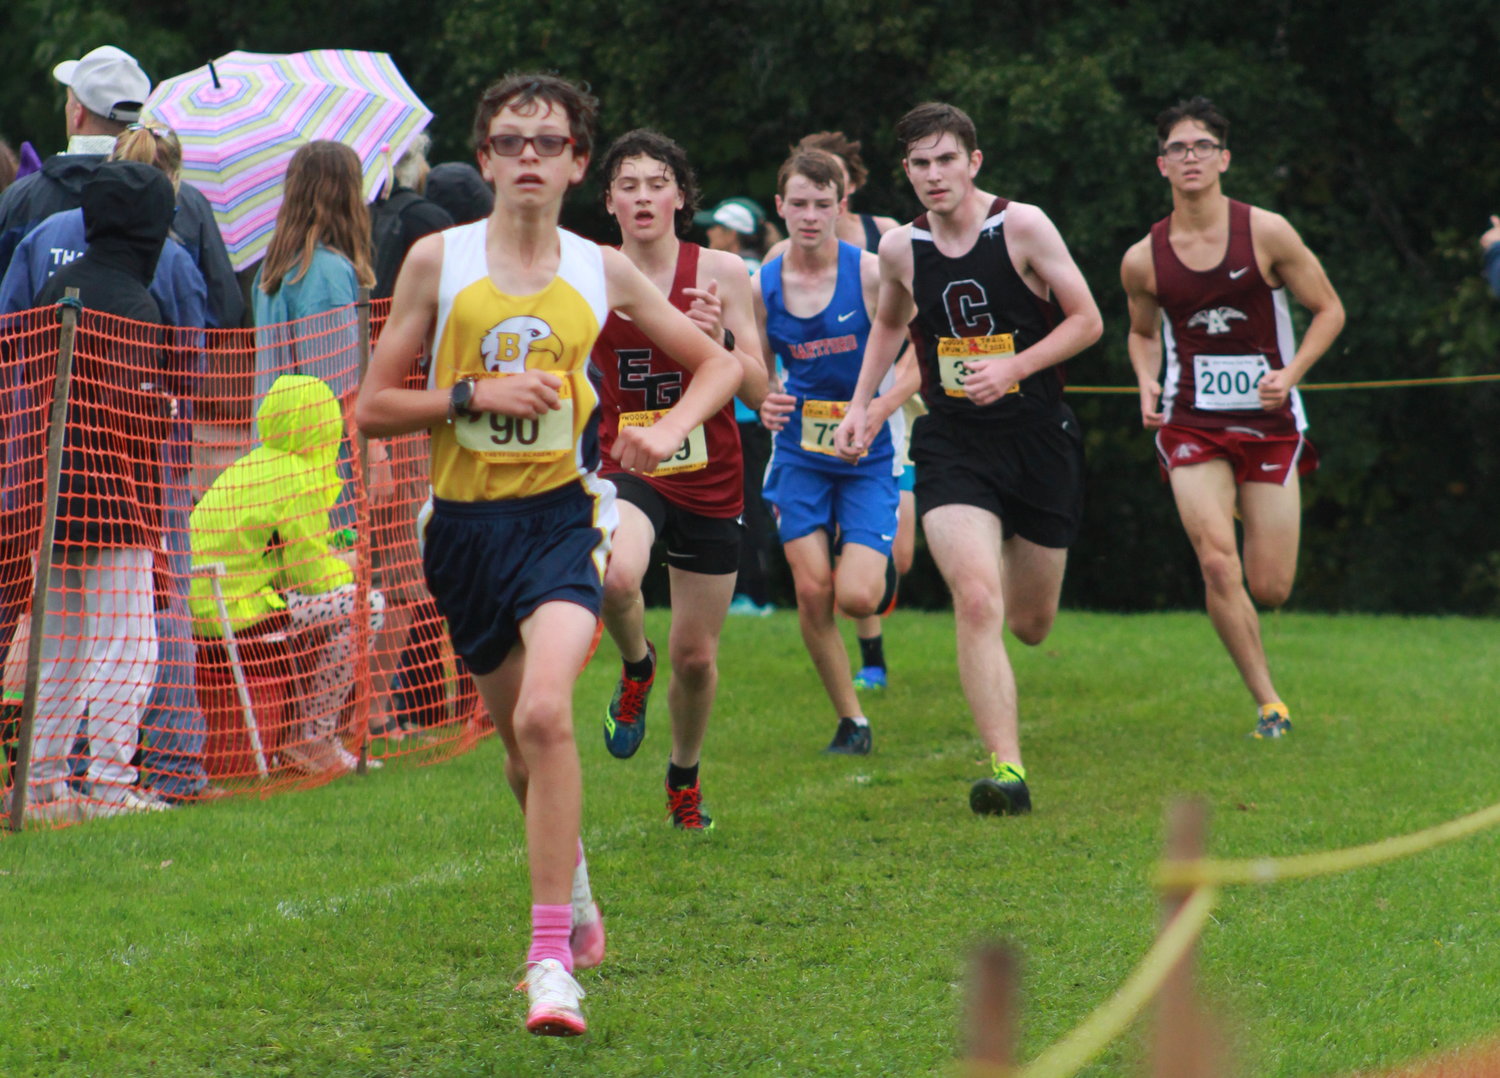 Barrington High School’s Sam Barber (left) races to the finish line during the Thetford Invitational cross country race last weekend.